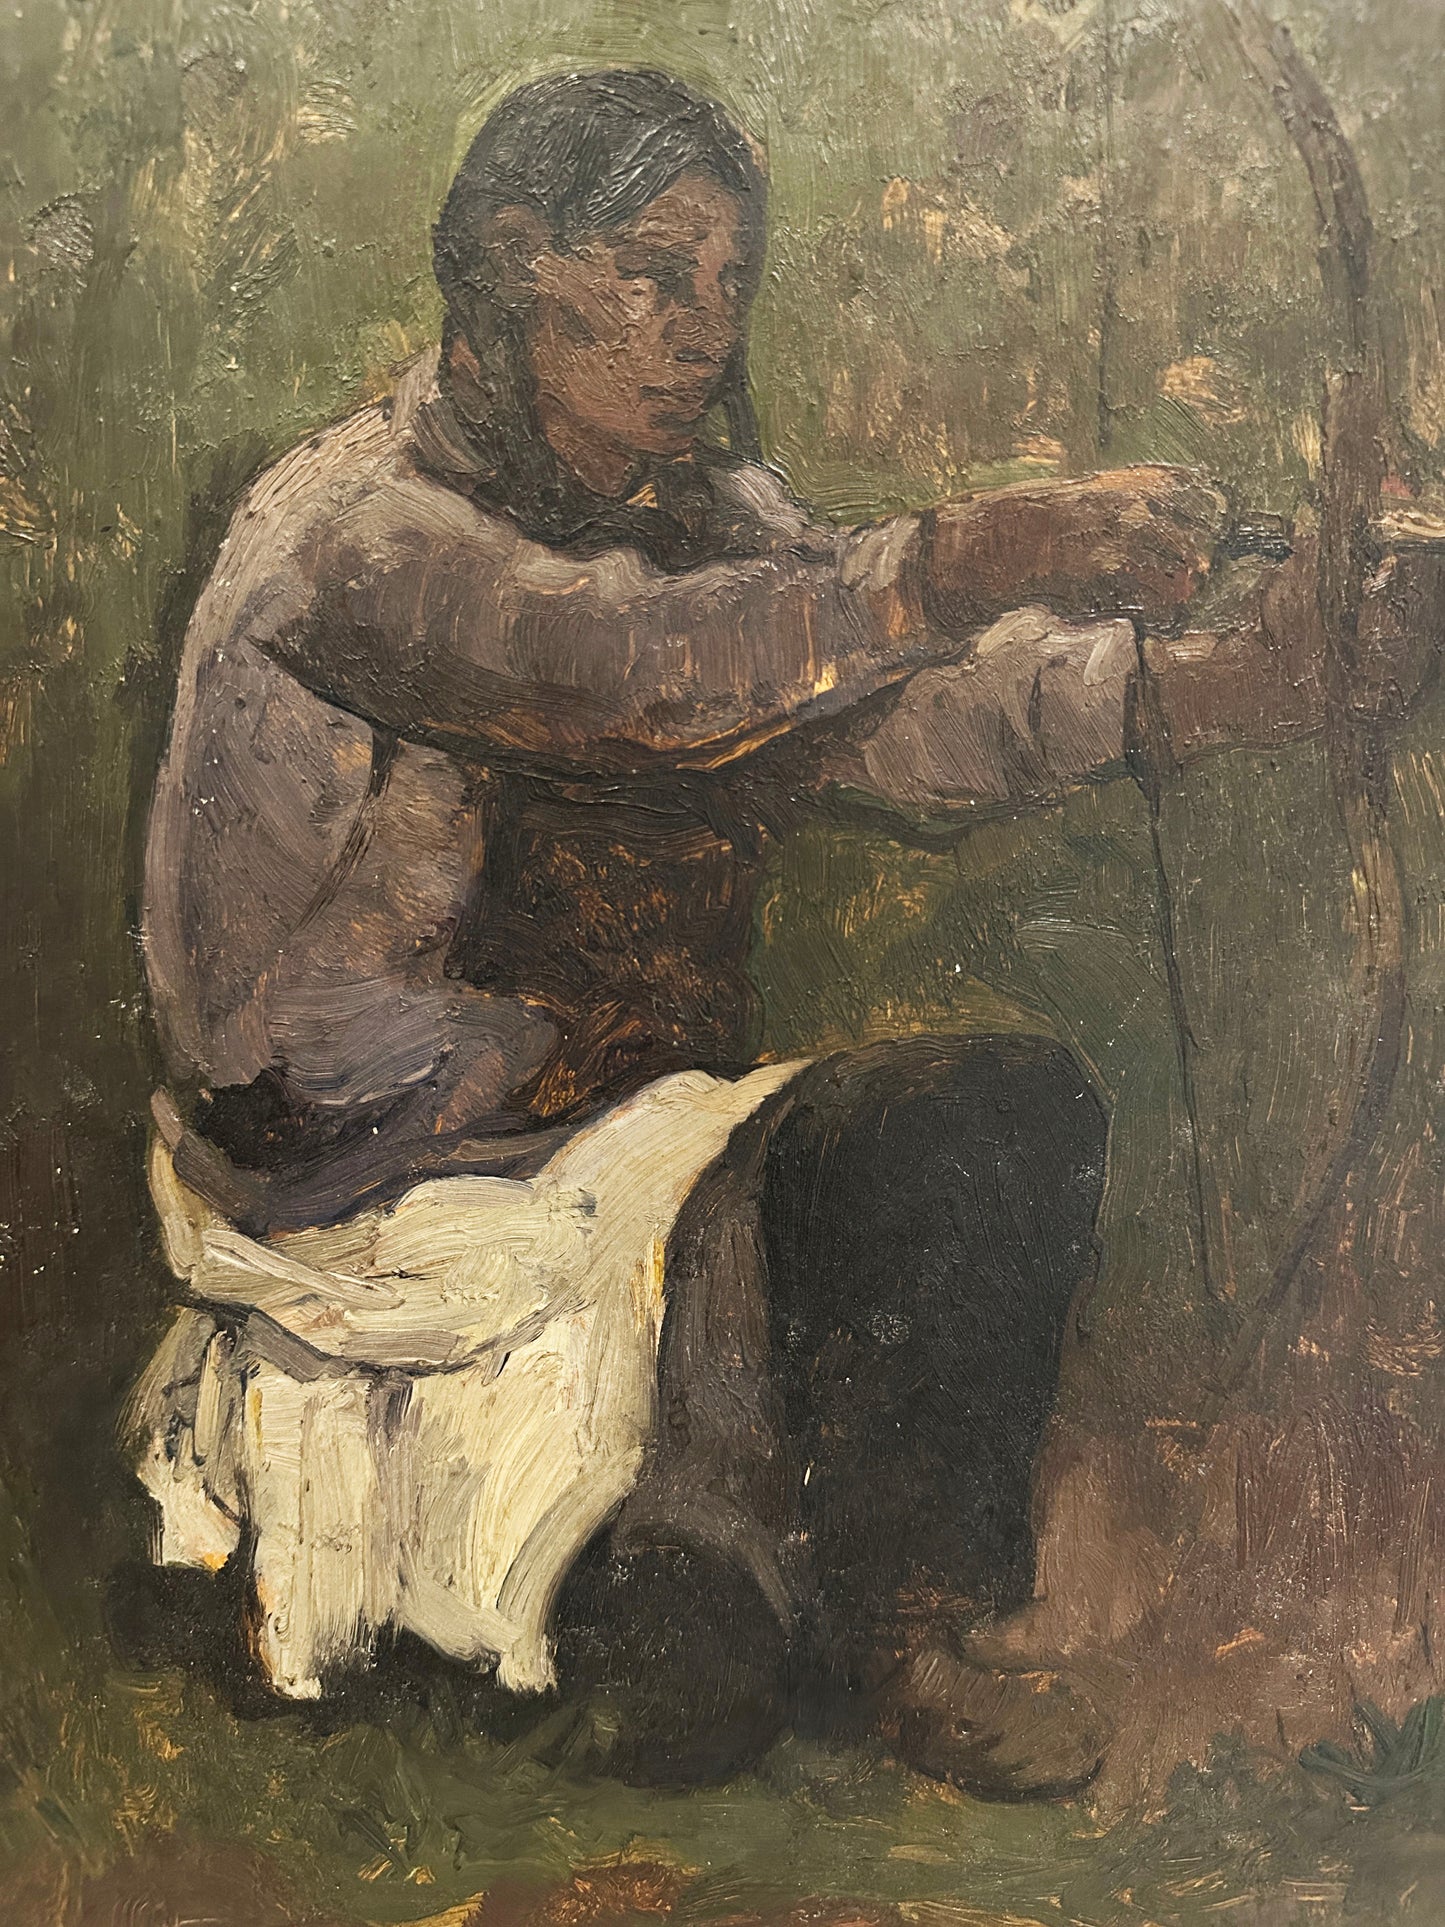 Eugene Higgins Oil Painting: A man with a bow and arrow